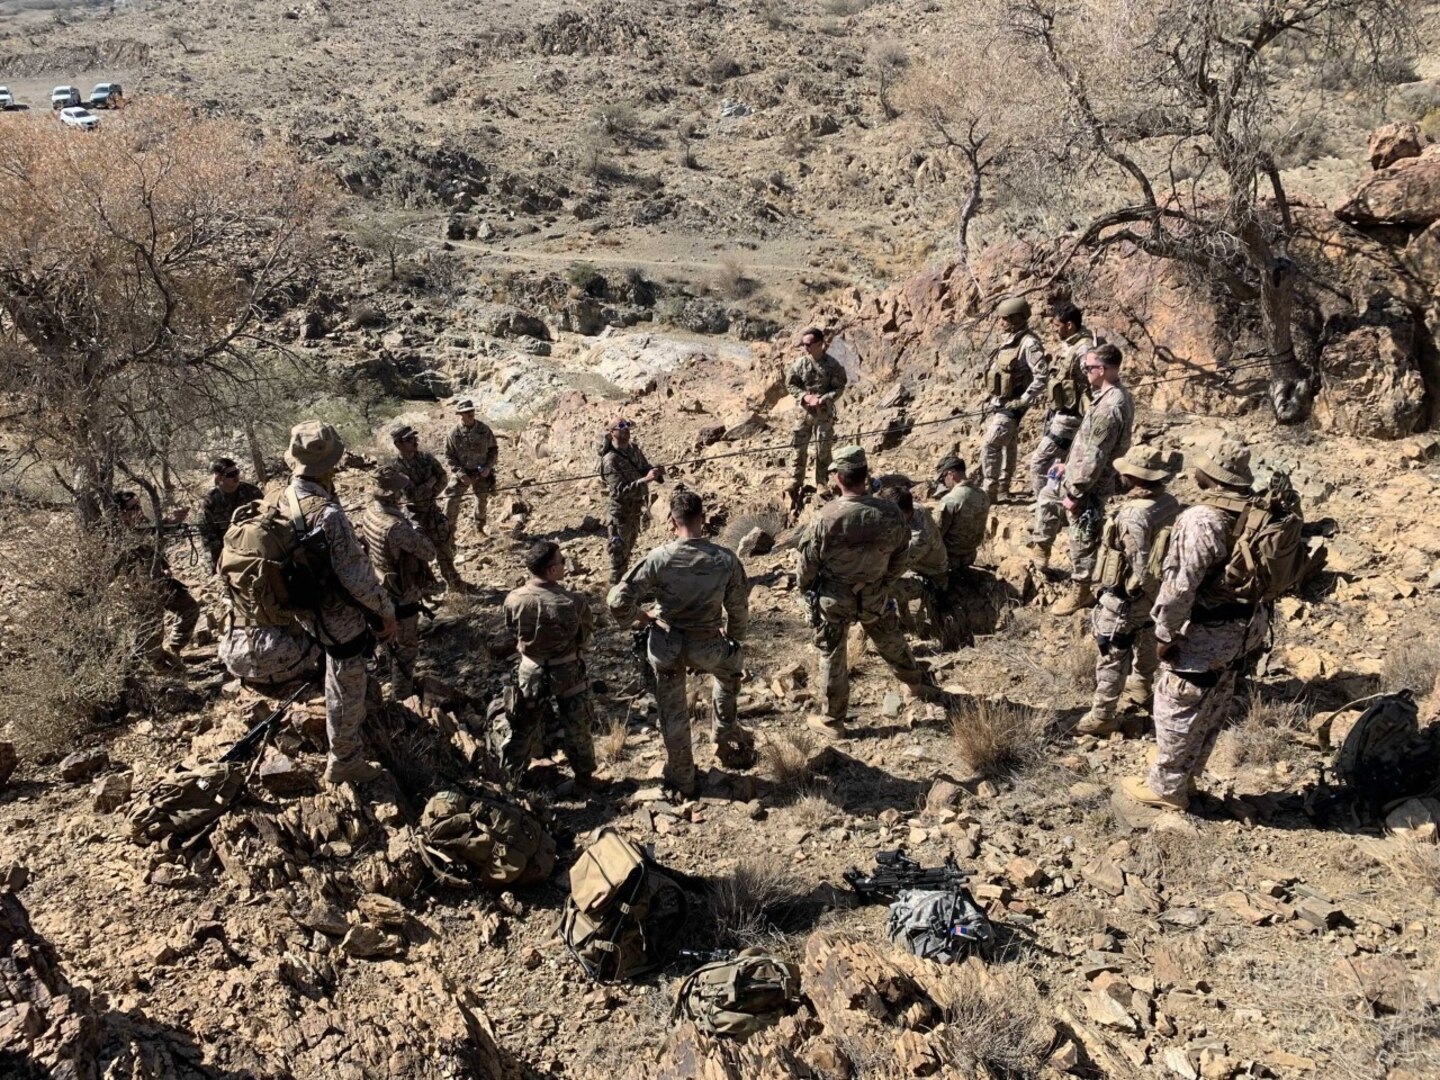 U.S. Army Soldiers from 3rd Battalion, 172 Infantry (Mountain) Headquarters Company and C Company, Vermont National Guard, conduct mountain training with Royal Saudi Land Forces at the RSLF Mountain Warfare School in Saudi Arabia. Between October and November 2021, approximately 70 U.S. Army Soldiers attended the training. (courtesy photo)